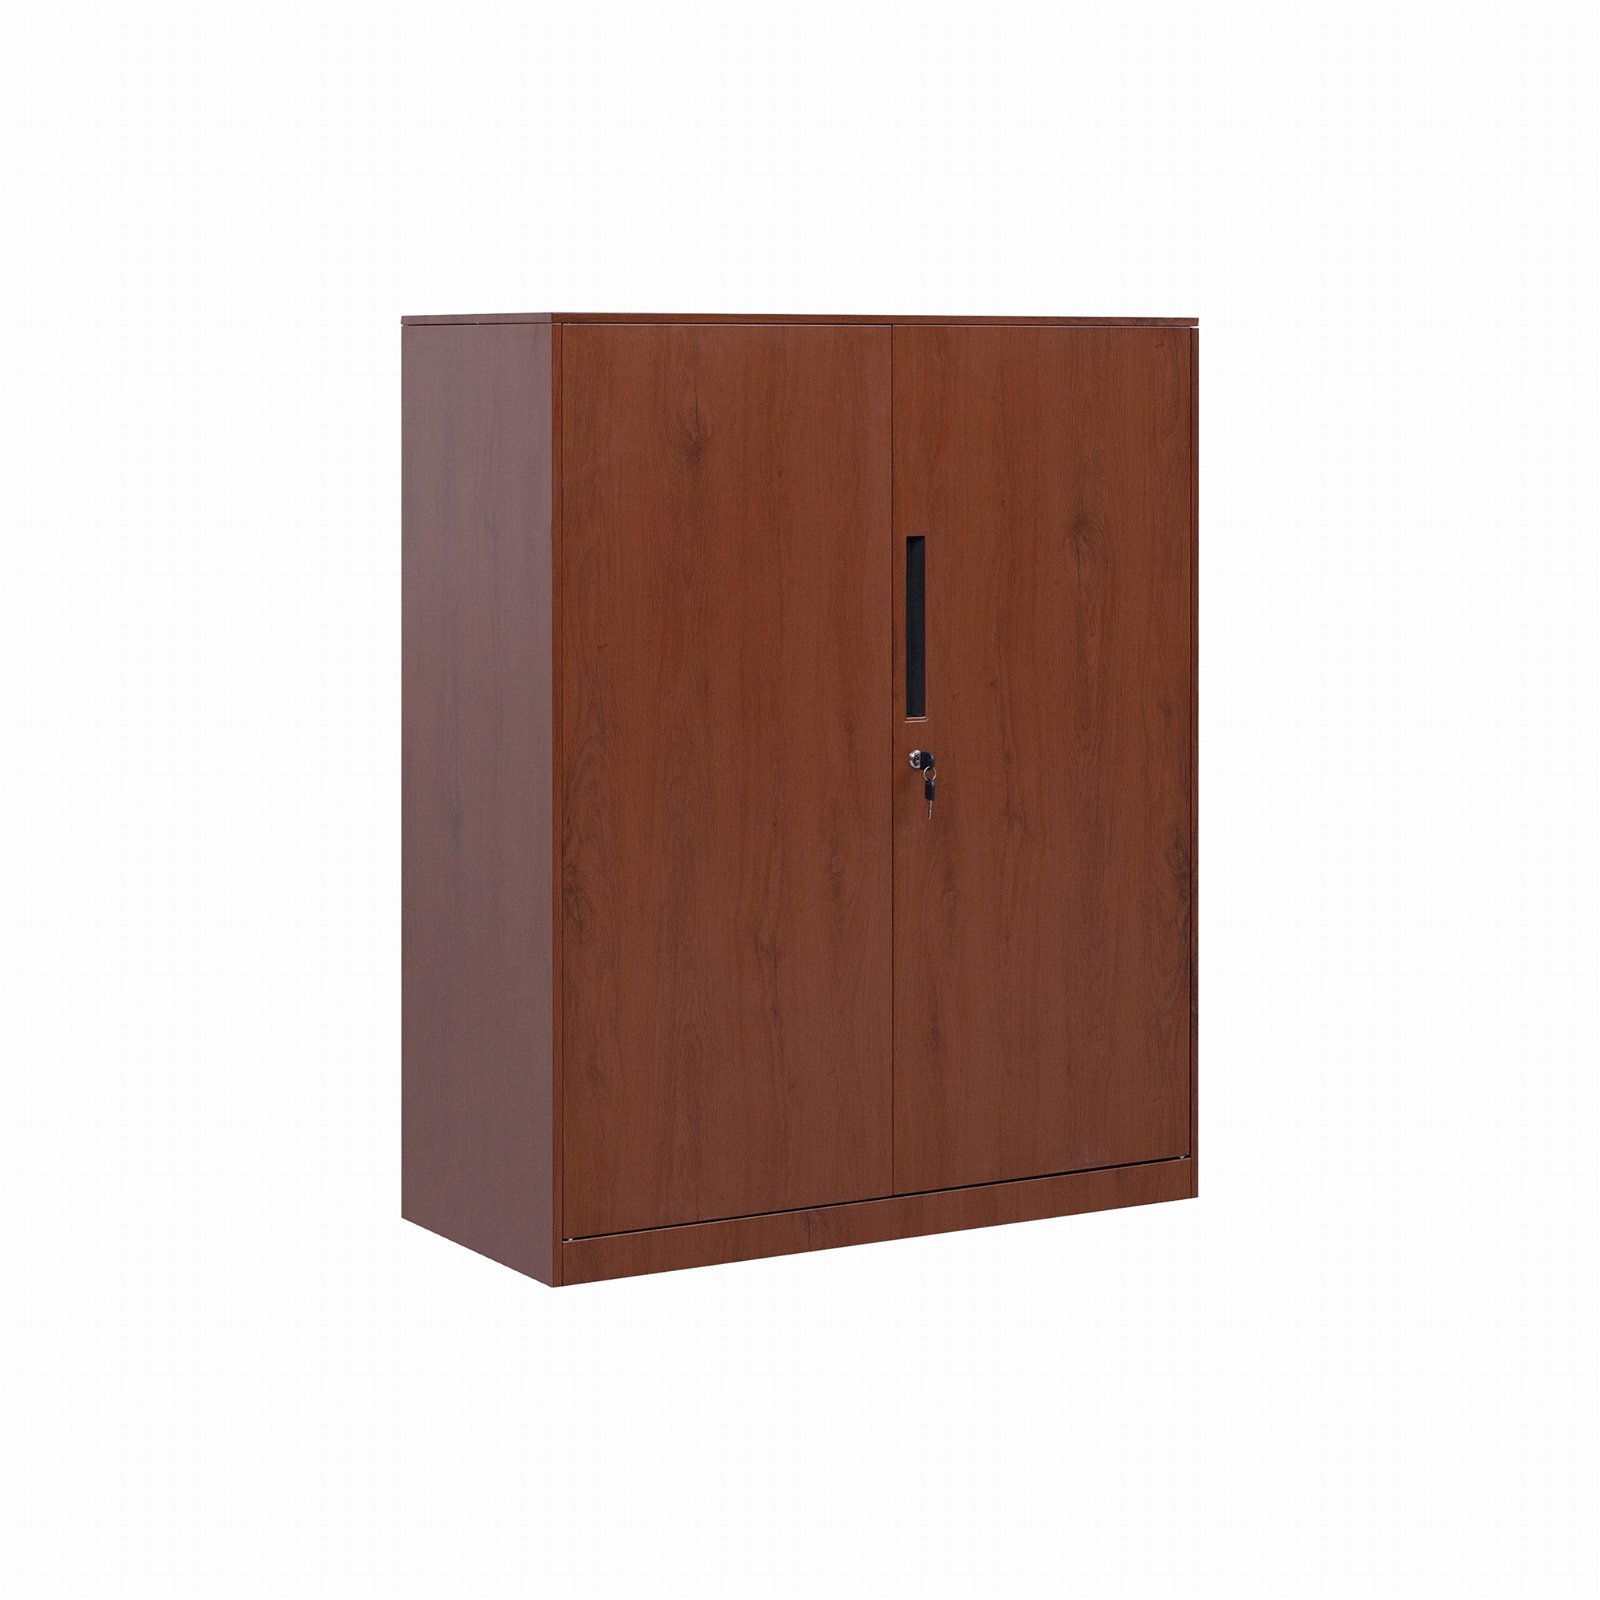 Wooden color cabinet 2